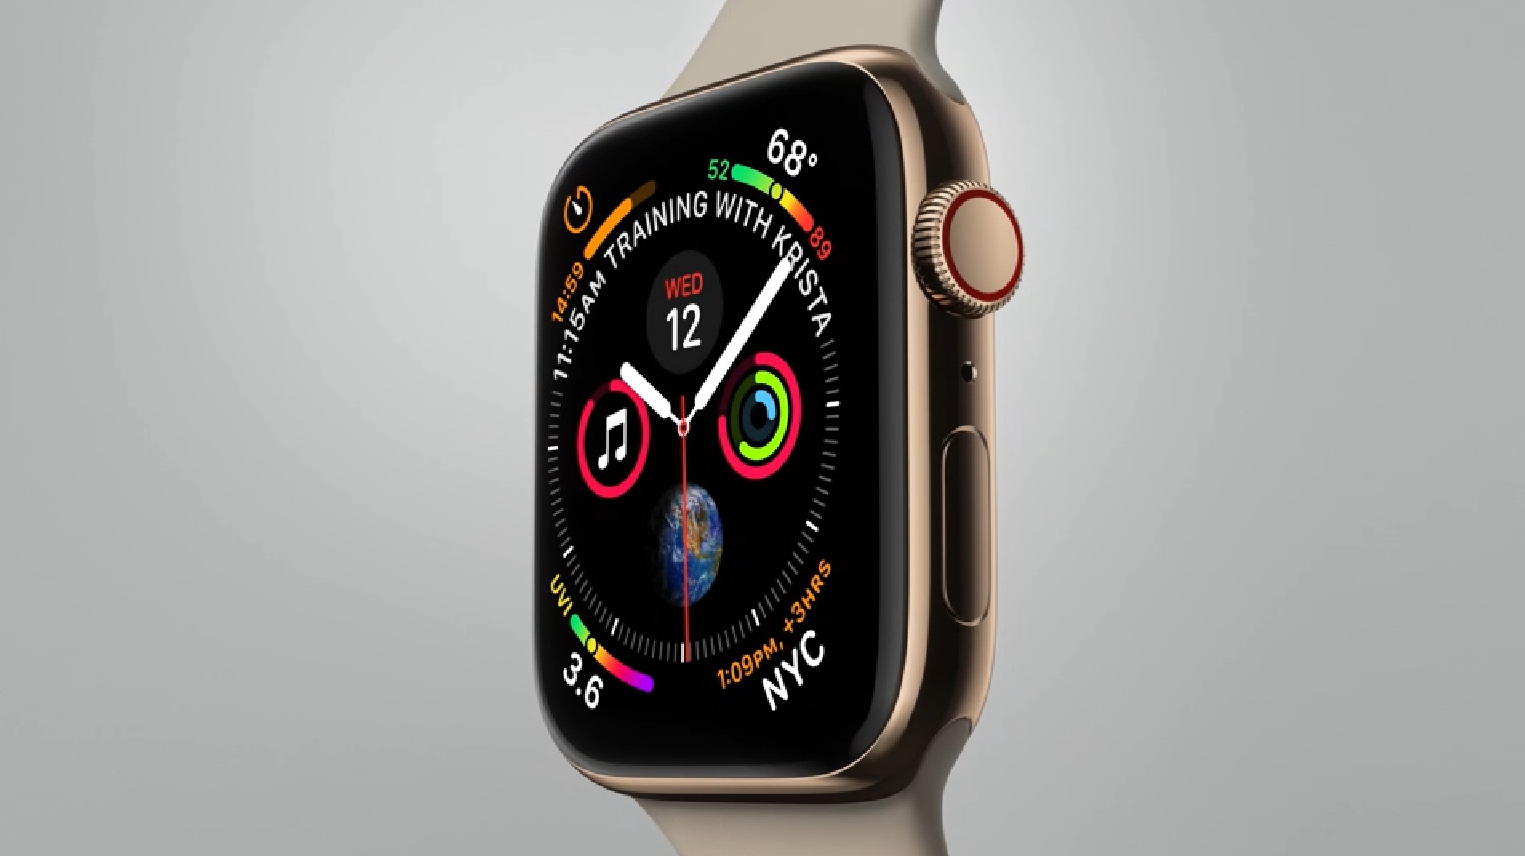 TMobile is offering a free Apple Watch Series 4 or iPad to new